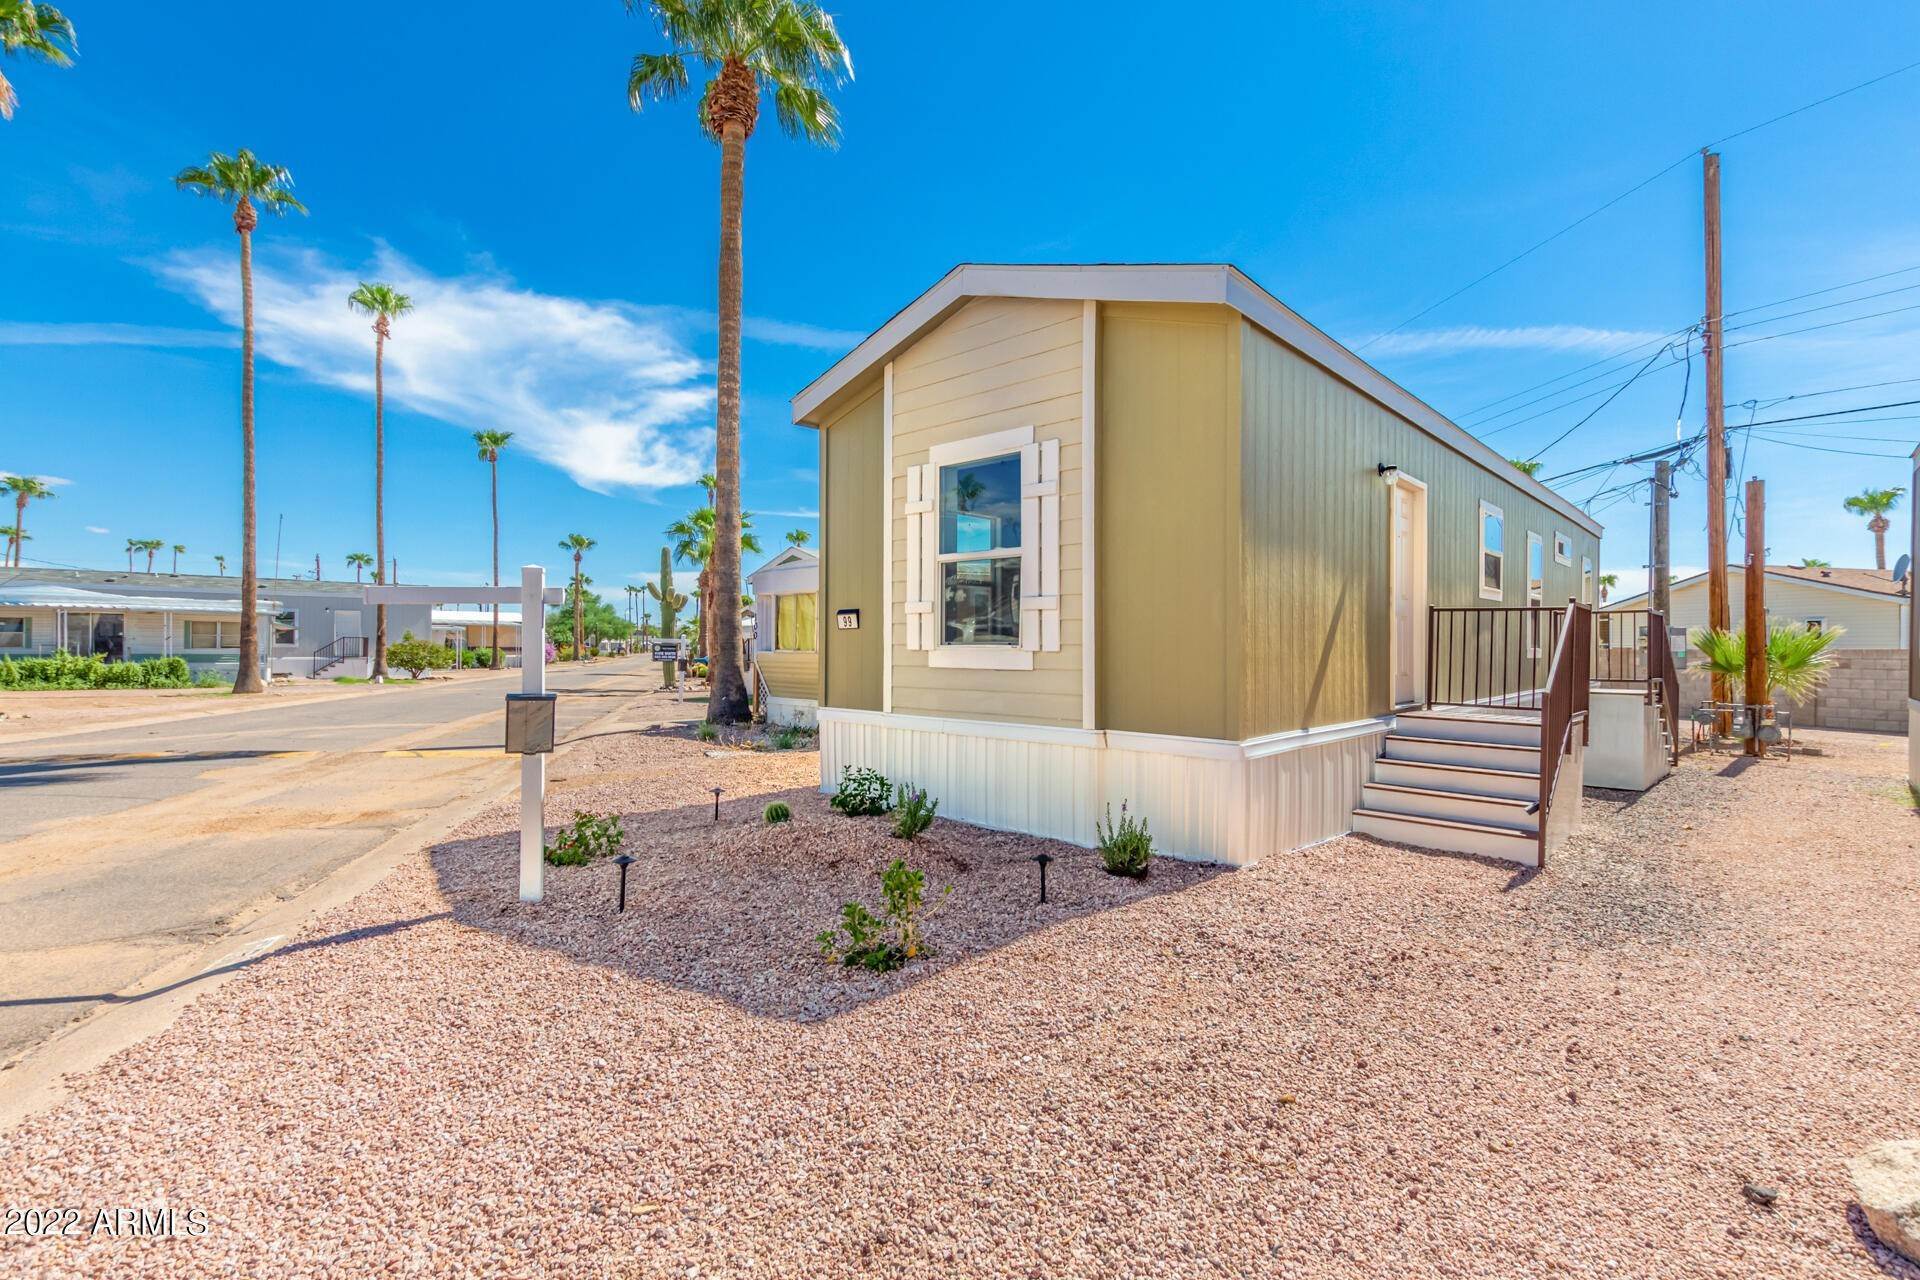 1. Manufactured Home for Sale at Mesa, AZ 85207